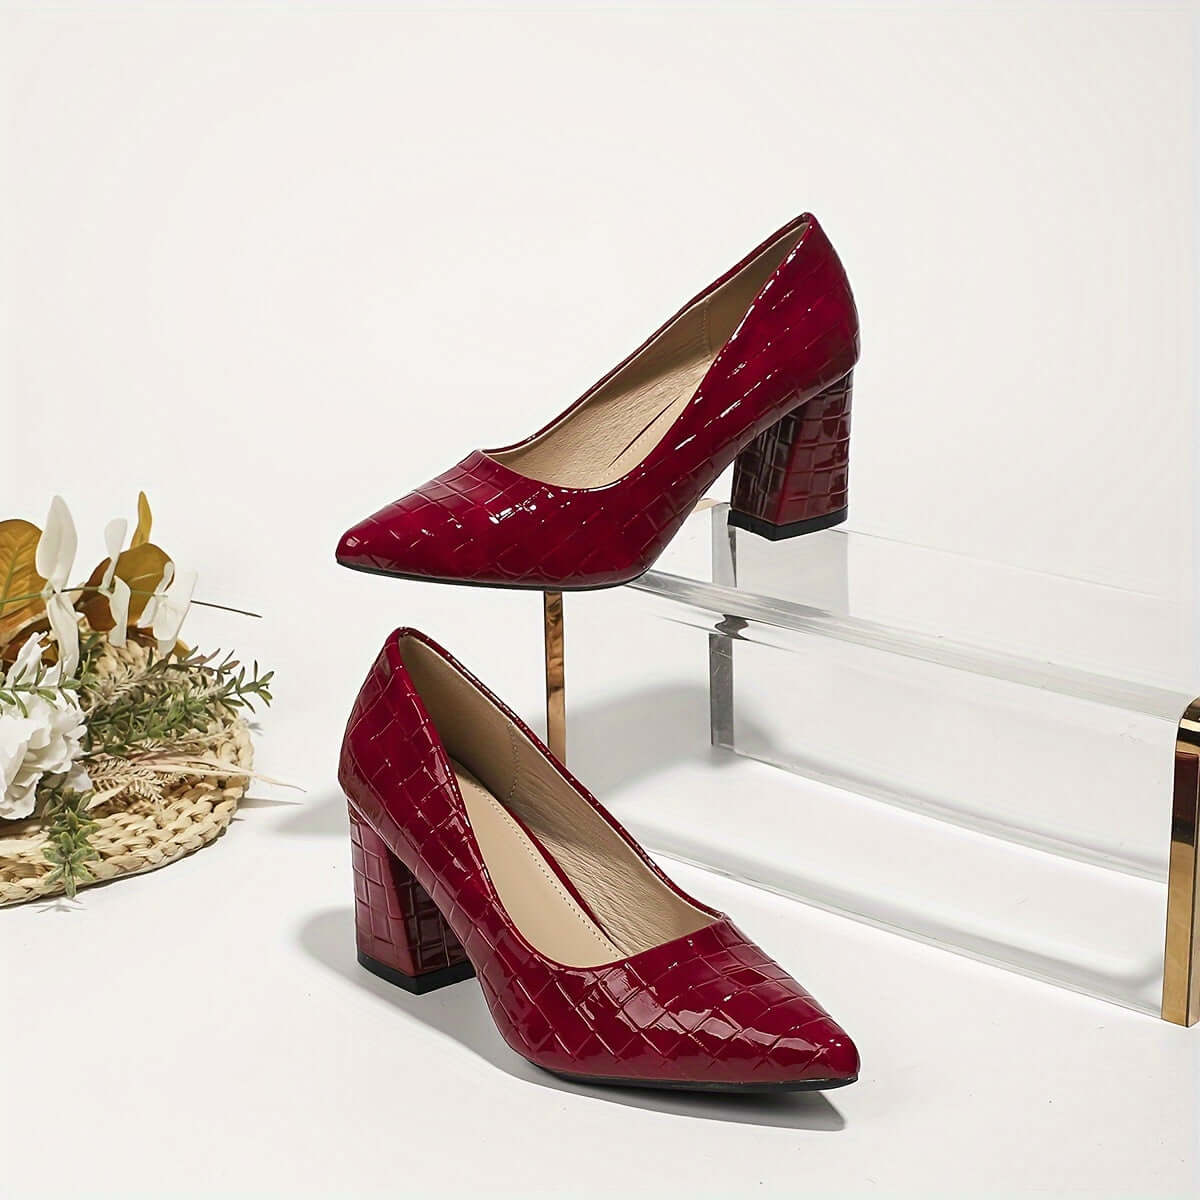 Step Into Style: Comfy Pointe Toe Slip-On Plaid Block Heel Pumps